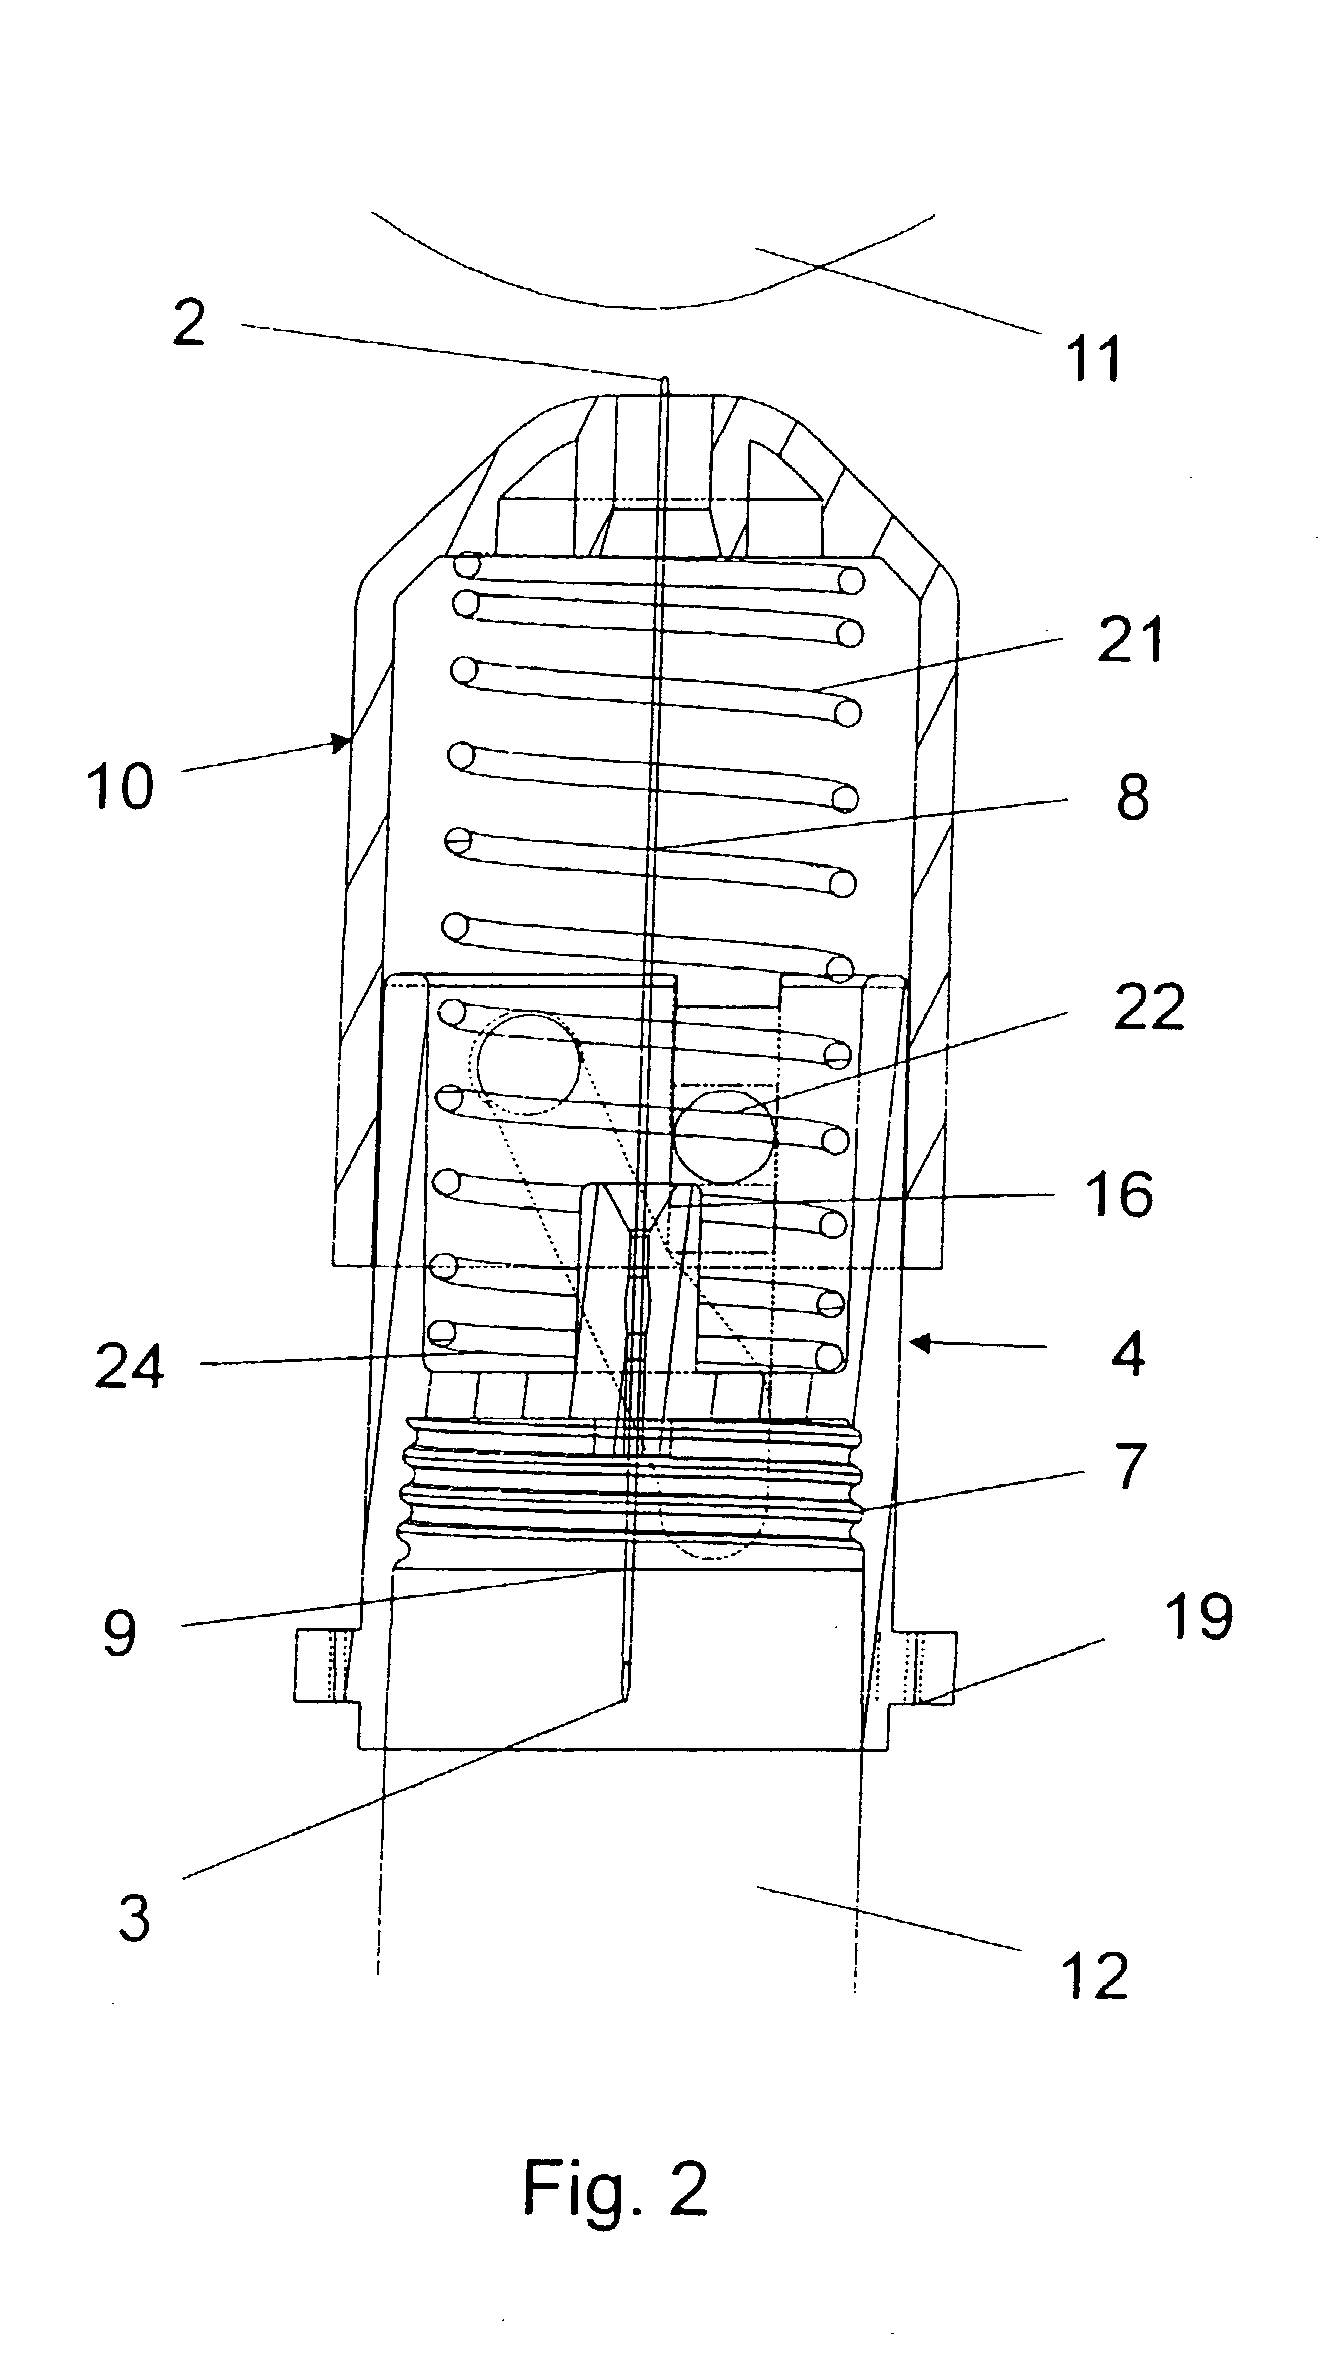 Disposable double pointed injection needle, and an insulin injection system comprising a disposable double pointed injection needle